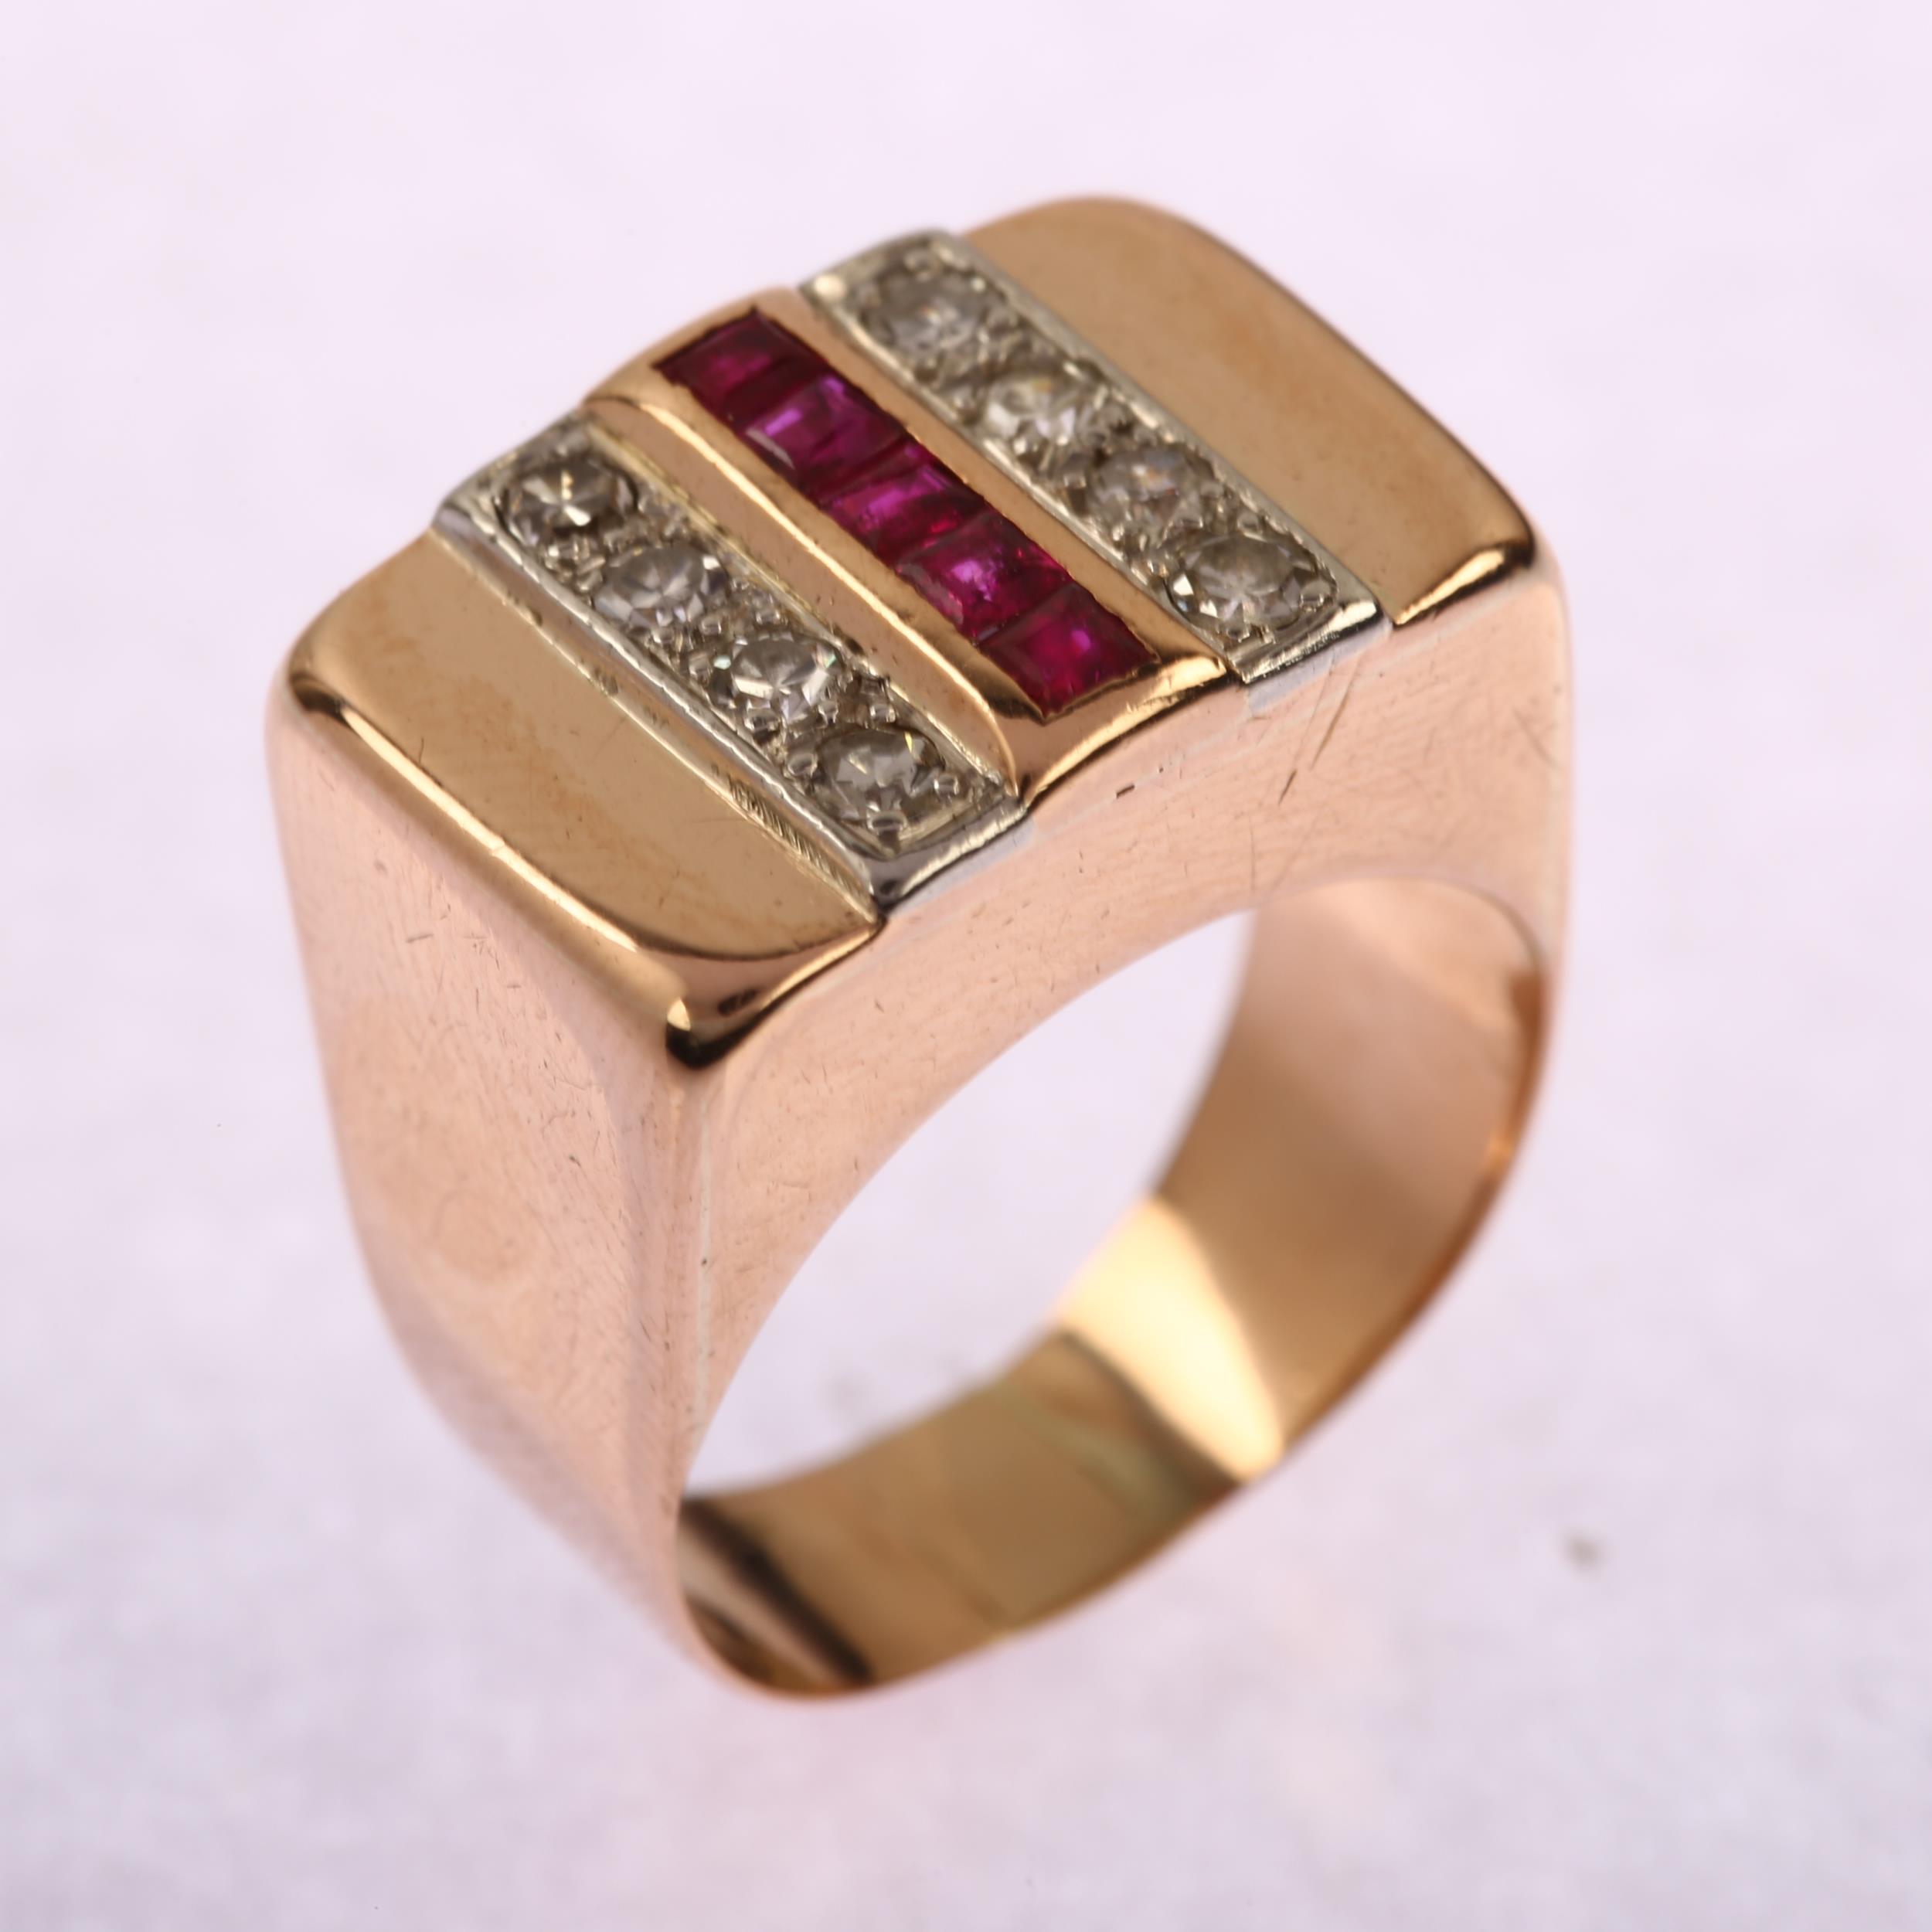 A mid-20th century ruby and diamond signet ring, unmarked 14ct rose gold odenesque settings with - Image 2 of 4